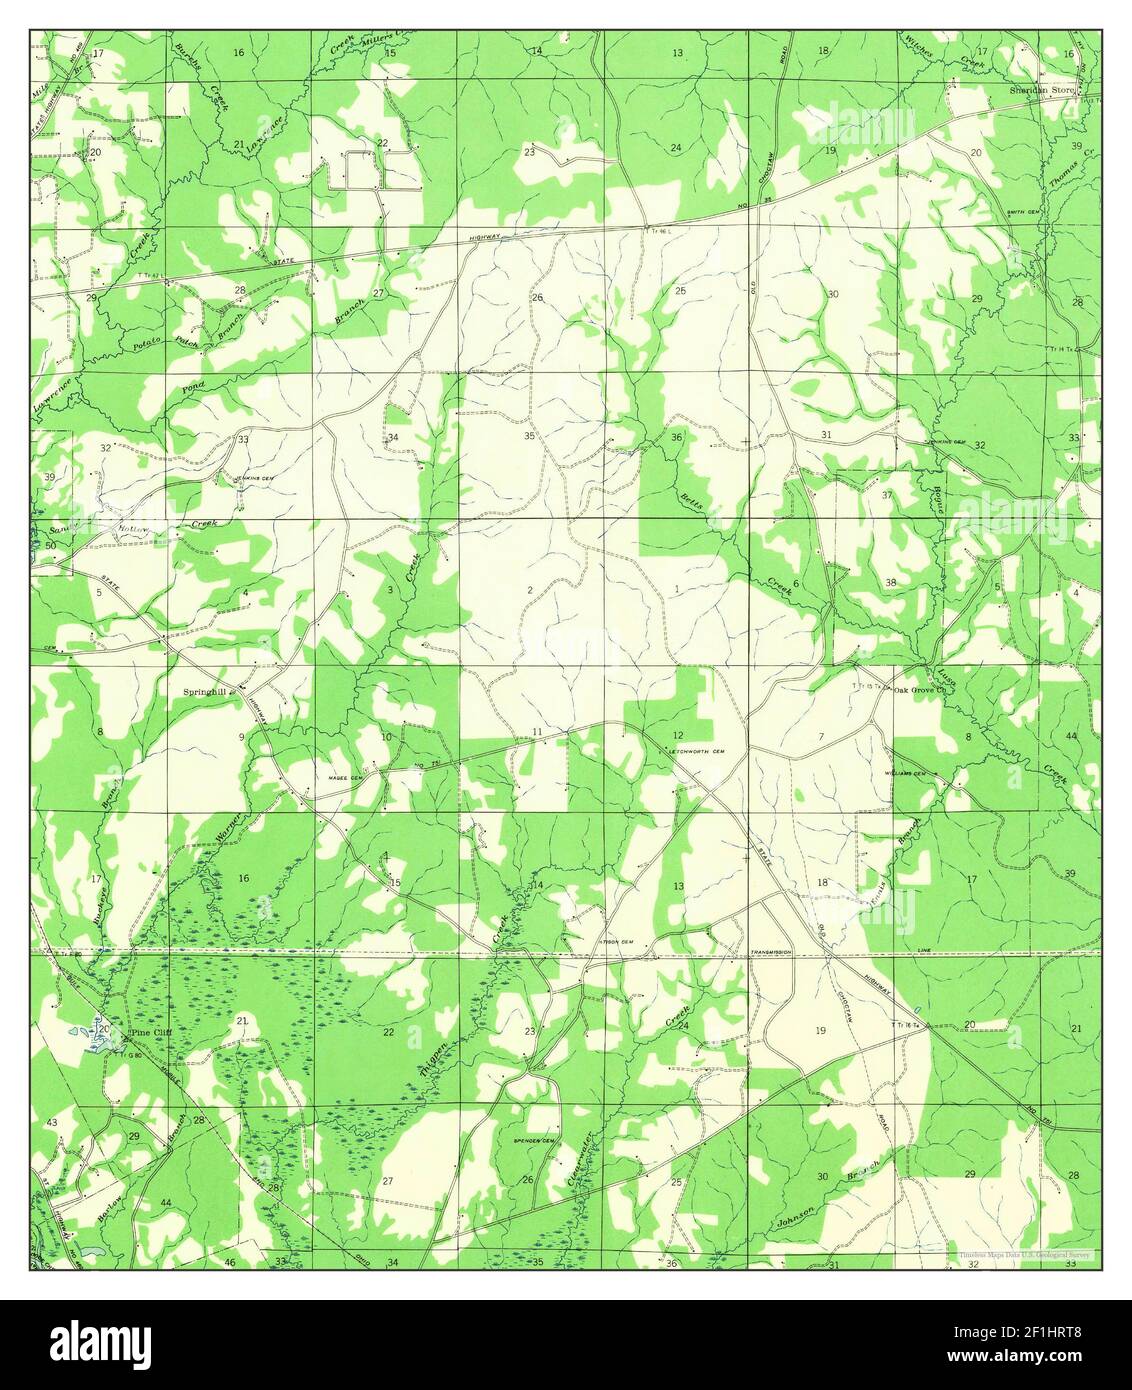 Thigpen, Louisiana, map 1942, 1:31680, United States of America by Timeless Maps, data U.S. Geological Survey Stock Photo